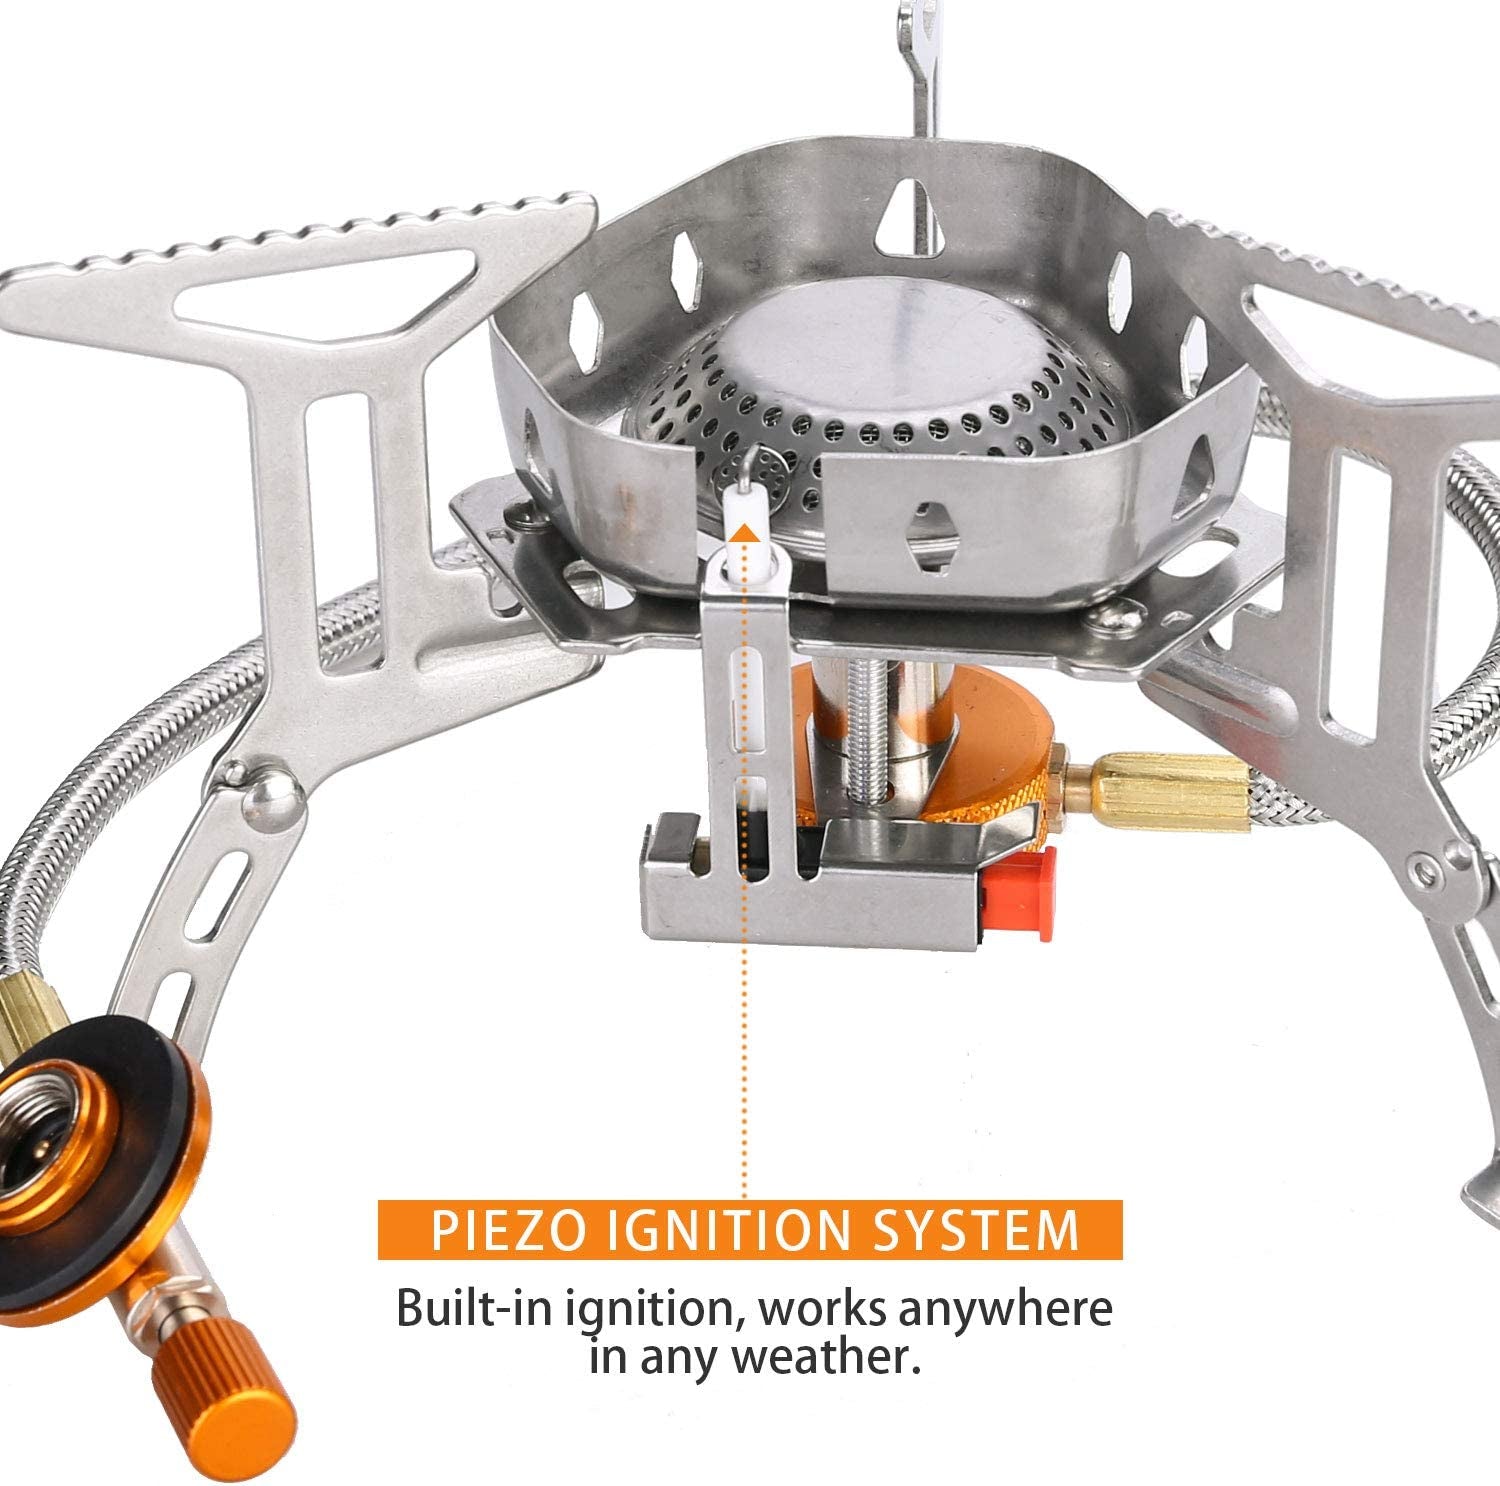 Windproof Camping Gas Stove -  Portable Collapsible Outdoor Camping Stove 